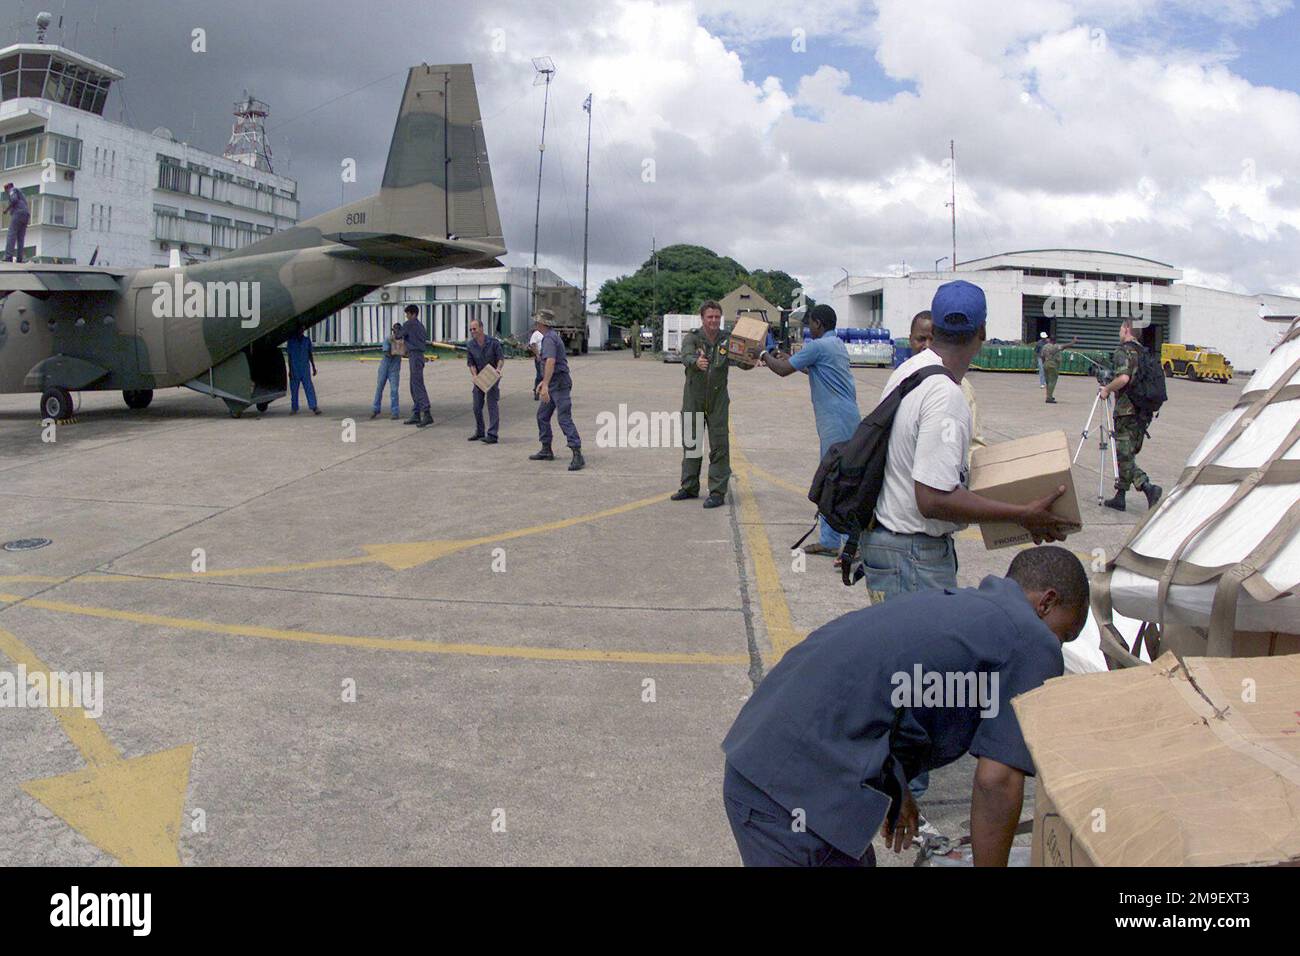 A straight on medium shot as a South African aircrew and local laborers load a South African Air Force aircraft, with humanitarian relief supplies destined for Beira, Mozambique, at the International Airport at Maputo, Mozambique, Africa on 16 March 2000. The South African Air Force along with several other nations (not shown) from around the world are in Maputo, to help the people of Mozambique, after severe flooding (flooding and victims not shown) displaced over a million people from their homes. Subject Operation/Series: ATLAS RESPONSE Base: Maputo State: Inhambane Country: Mozambique (MOZ Stock Photo